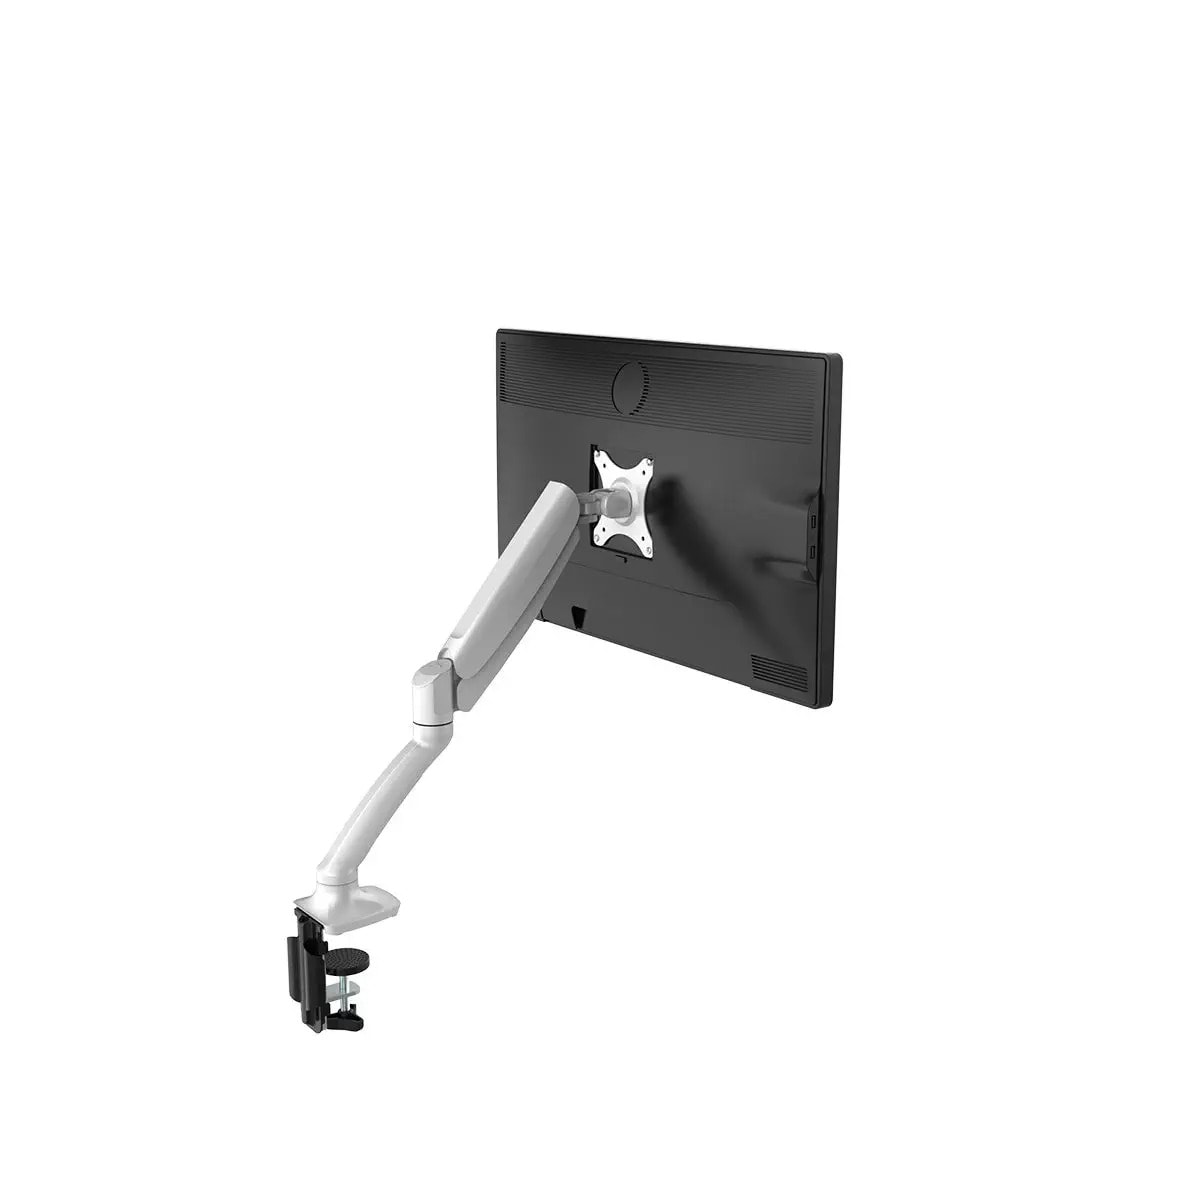 Loctek DLB504/VNDLB502 - (Dual/Single) Monitor Arm Supports Up To 30" Inch